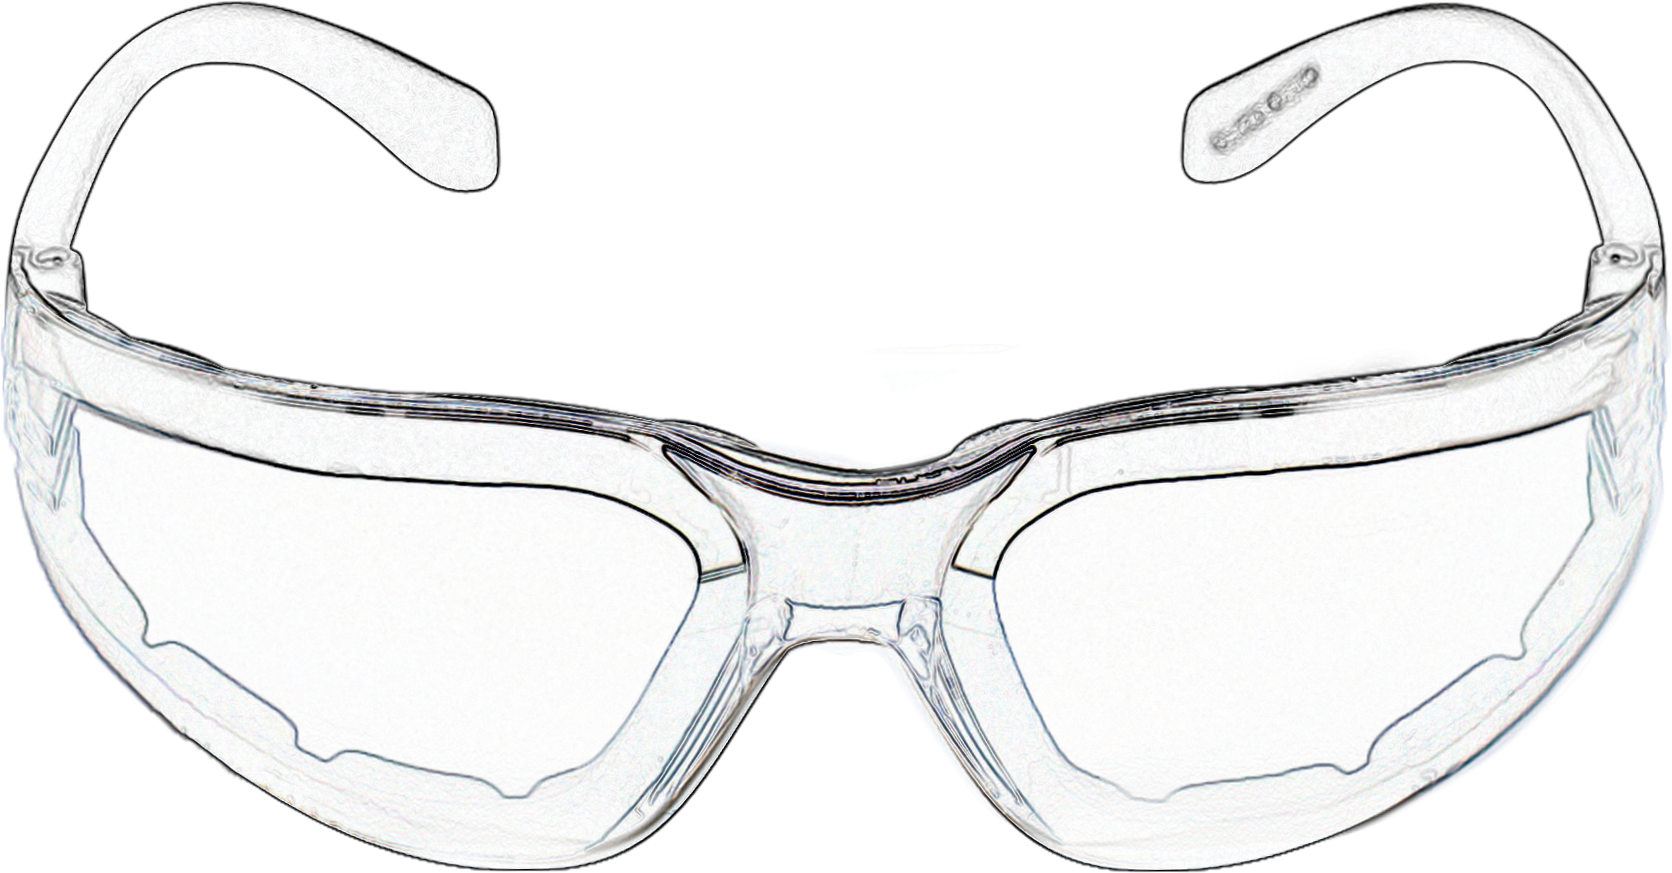 Foam-lined frameless eyewear for particle protection